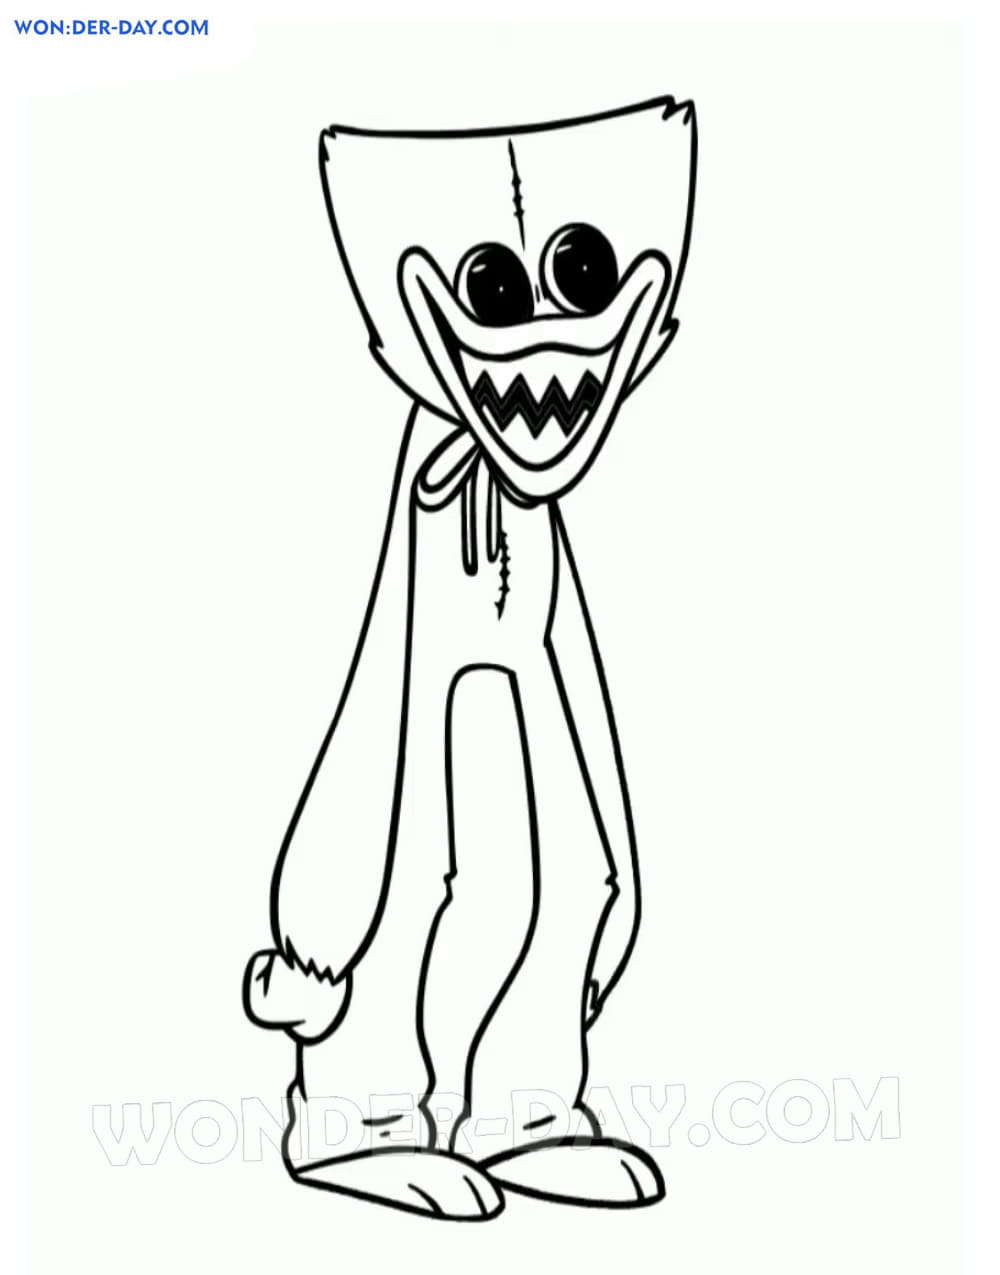 Huggy Wuggy coloring pages   Printable coloring pages